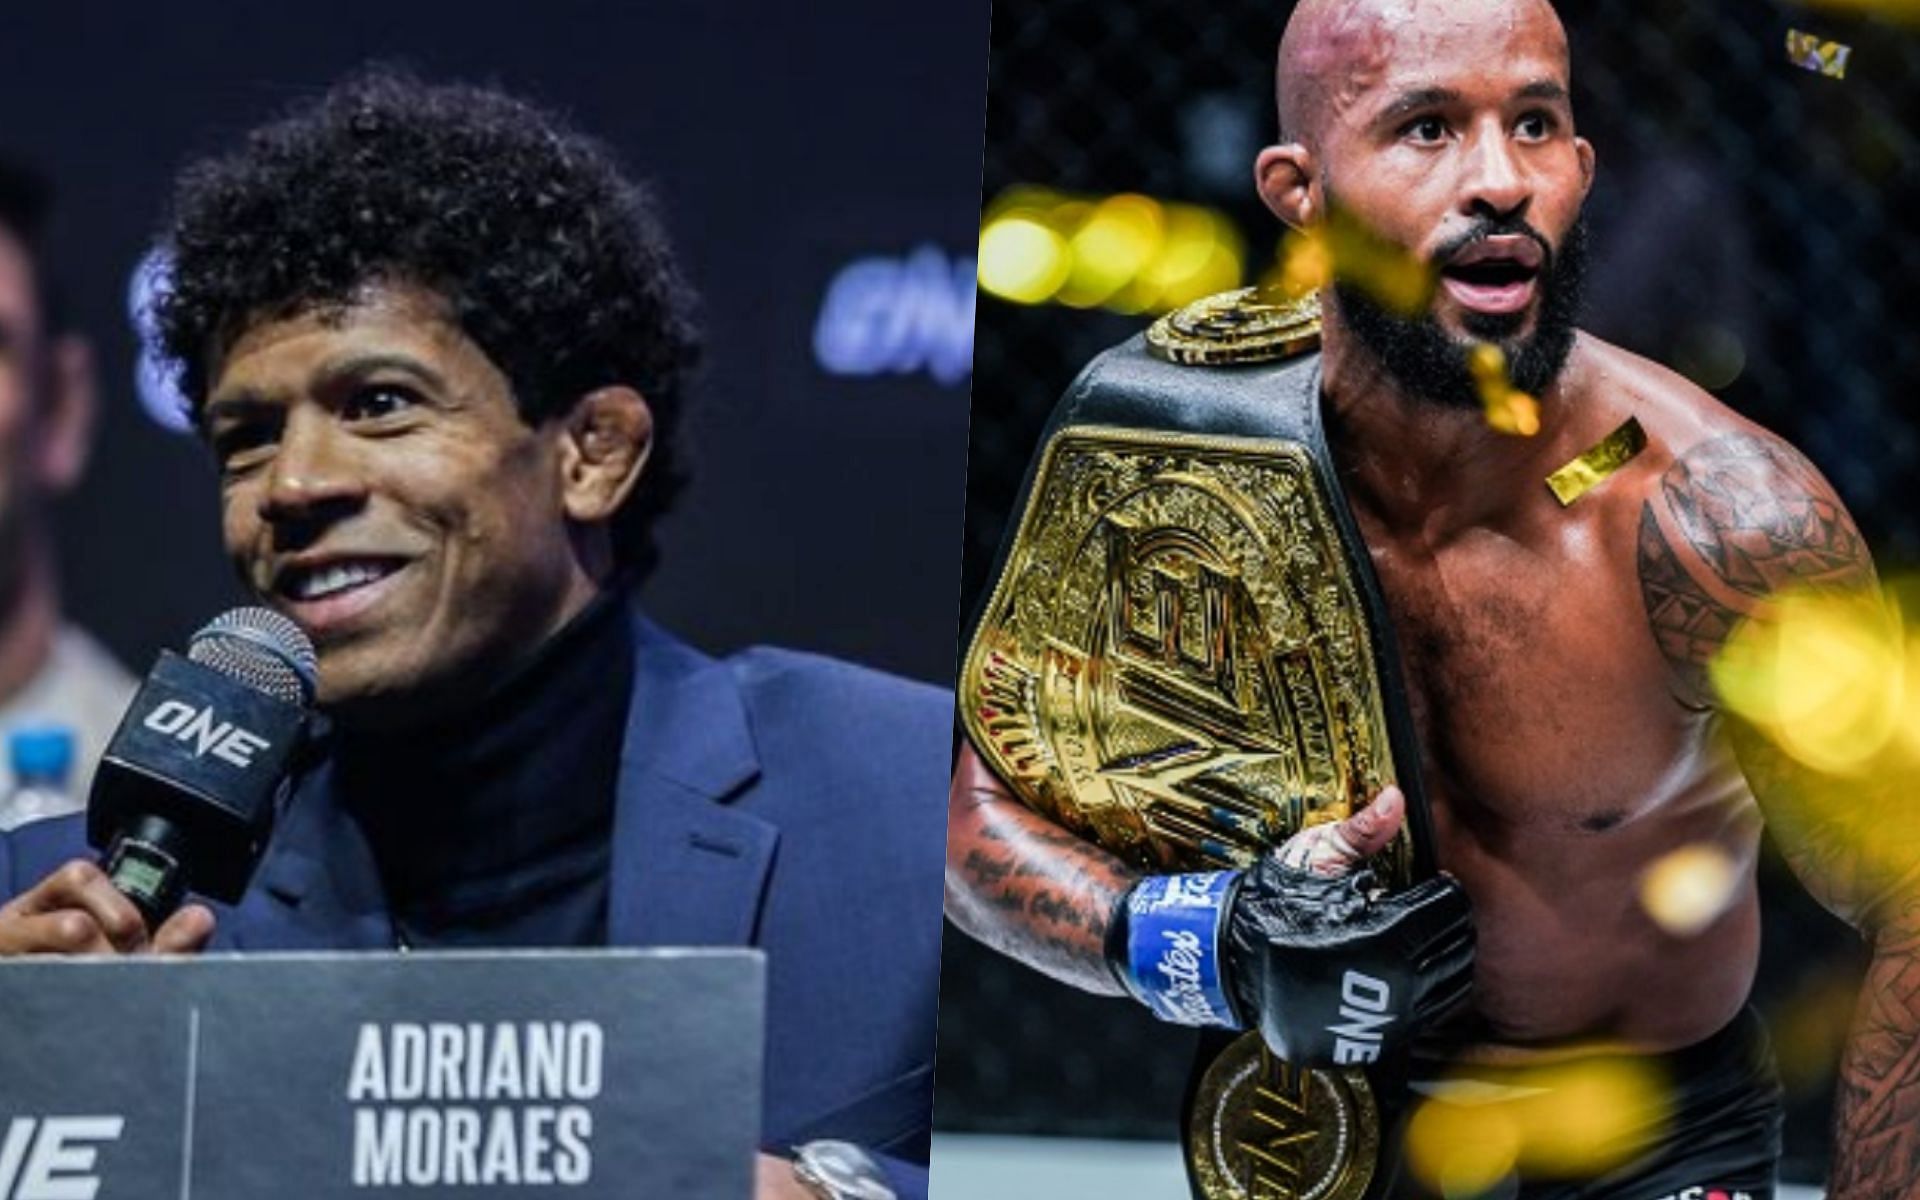 Adriano Moraes (L) and Demetrious Johnson (R) | Photo by ONE Championship